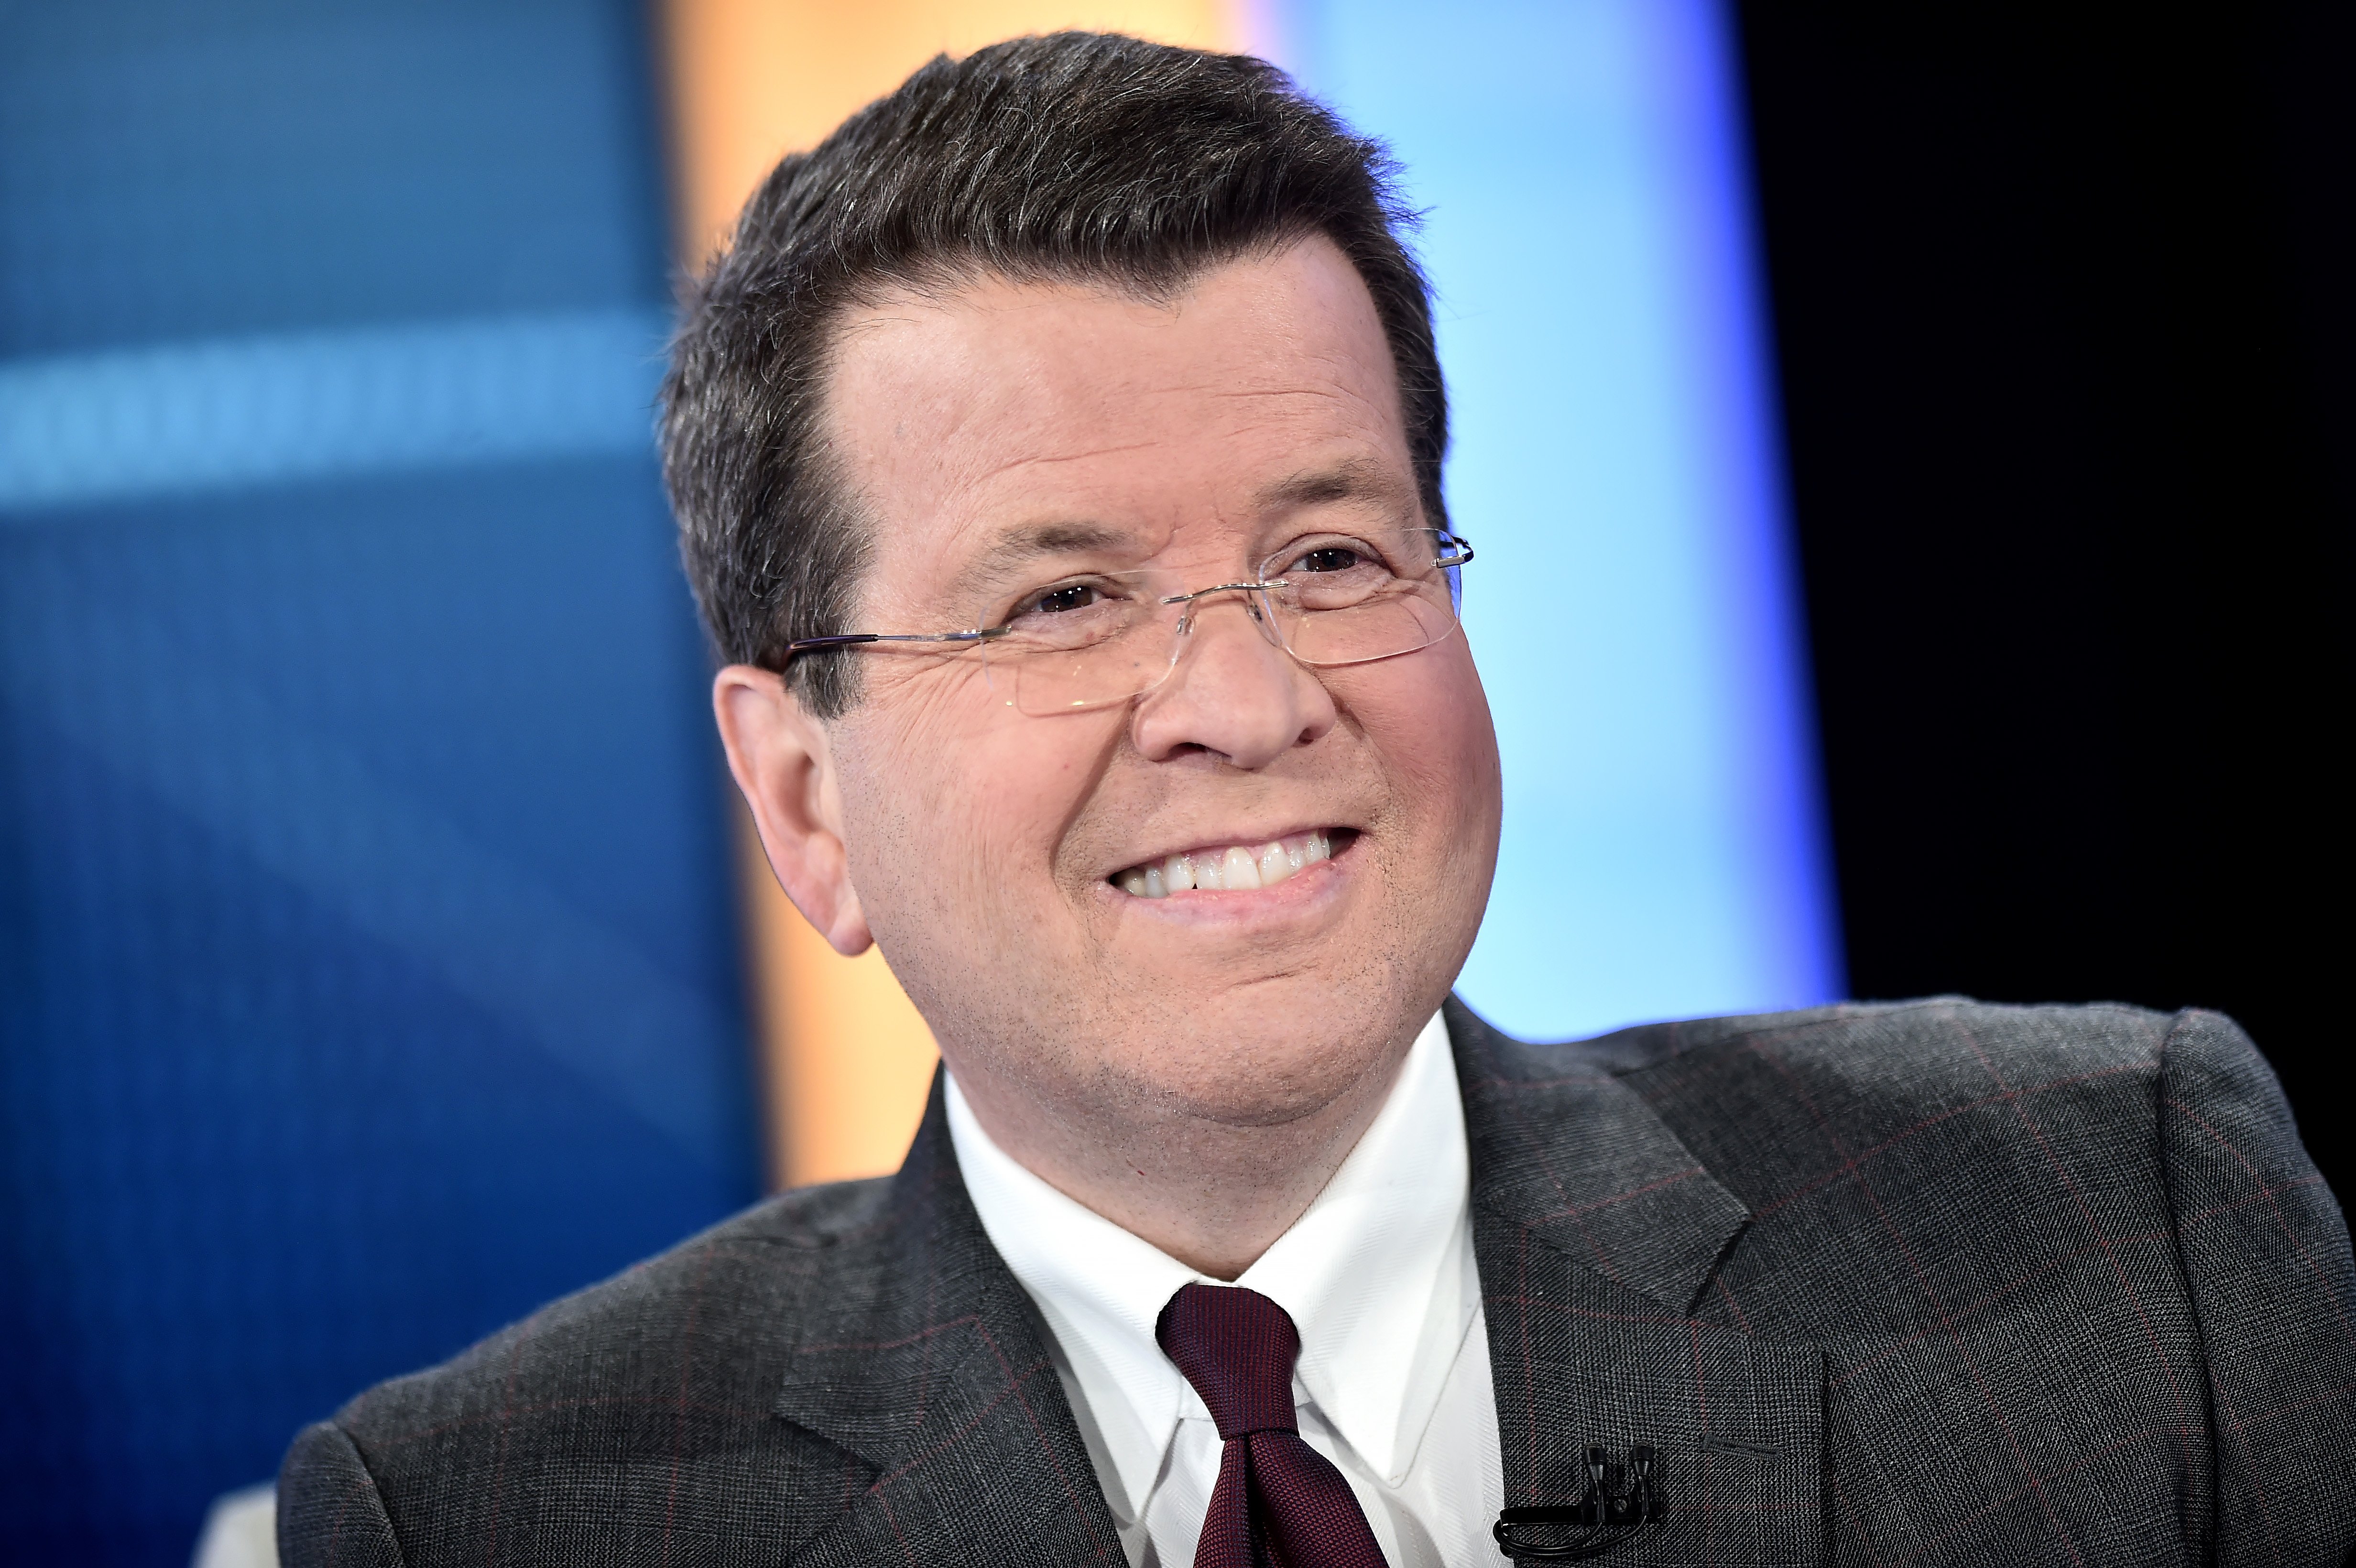  Neil Cavuto hosts "Your World With Neil Cavuto", 2019, New York, United States. | Source: Getty Images